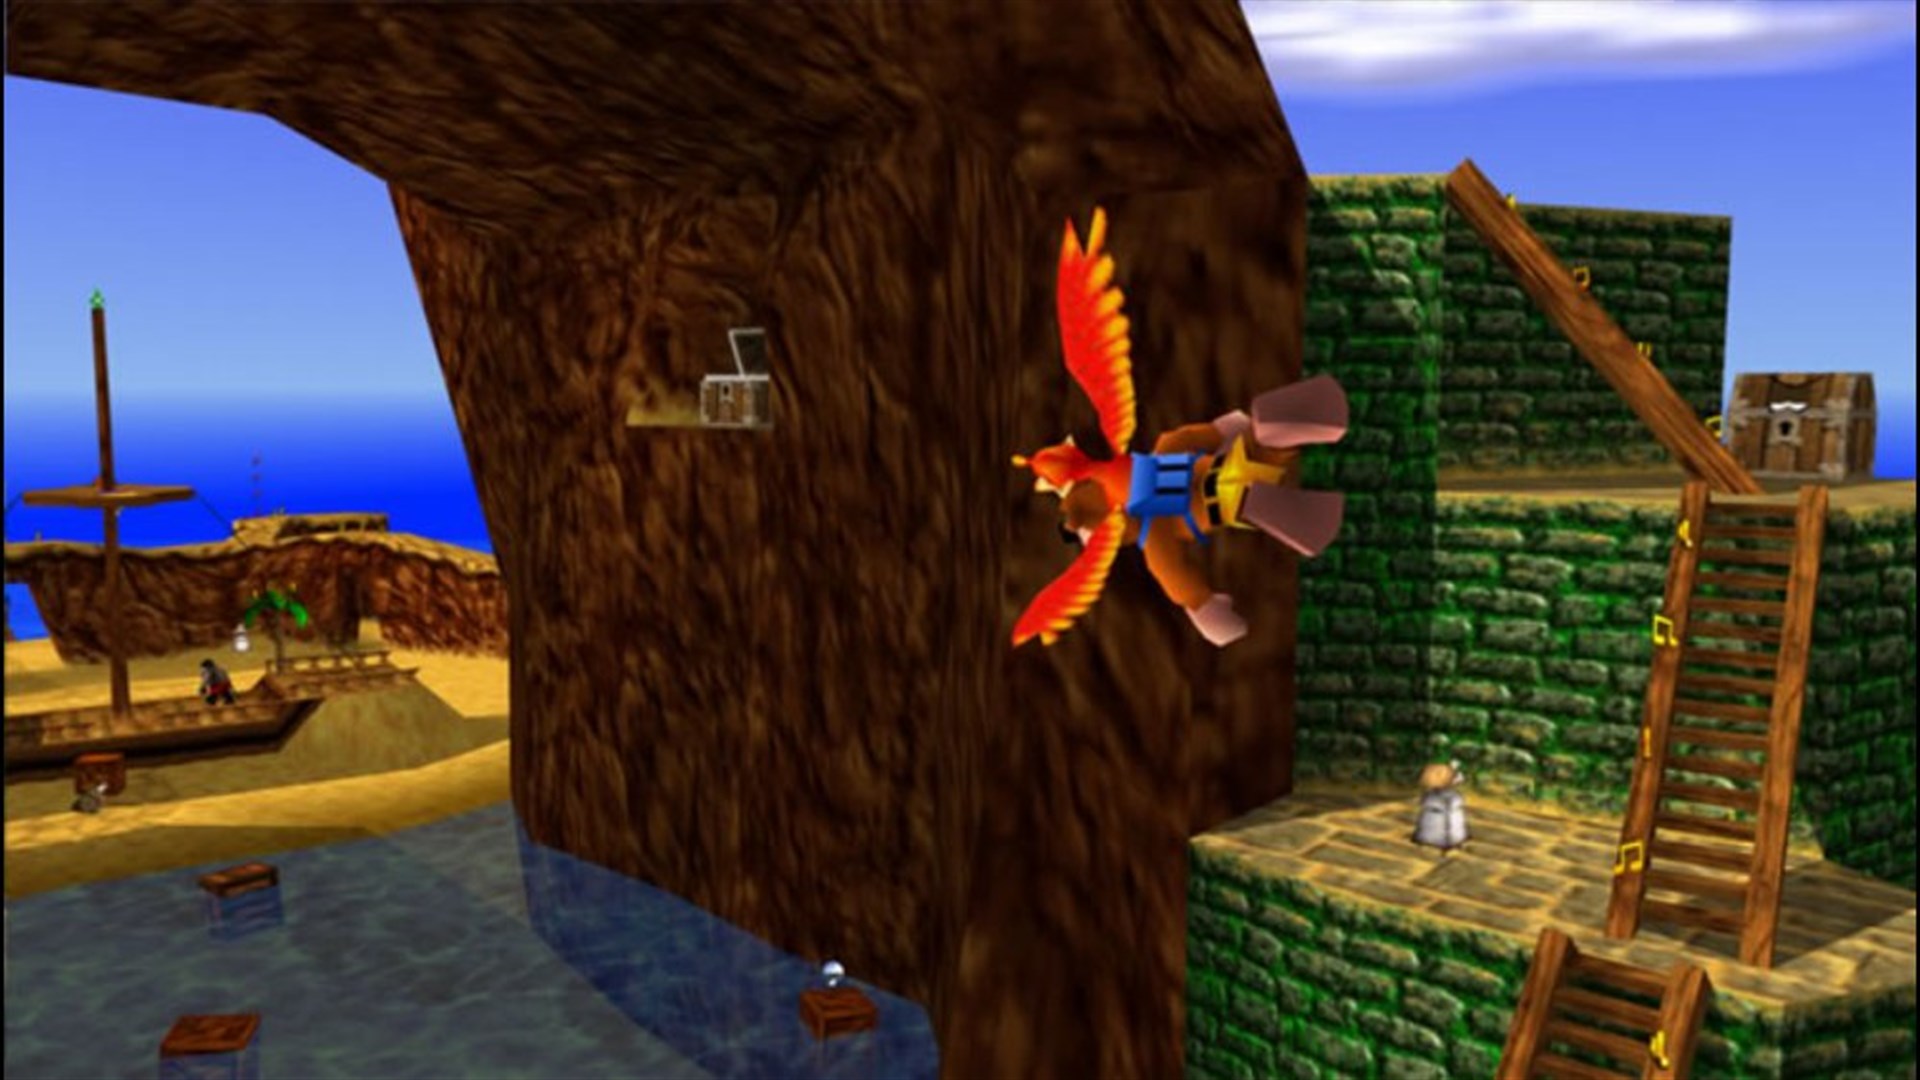 Banjo-Kazooie is an old classic that you can play on Game Pass